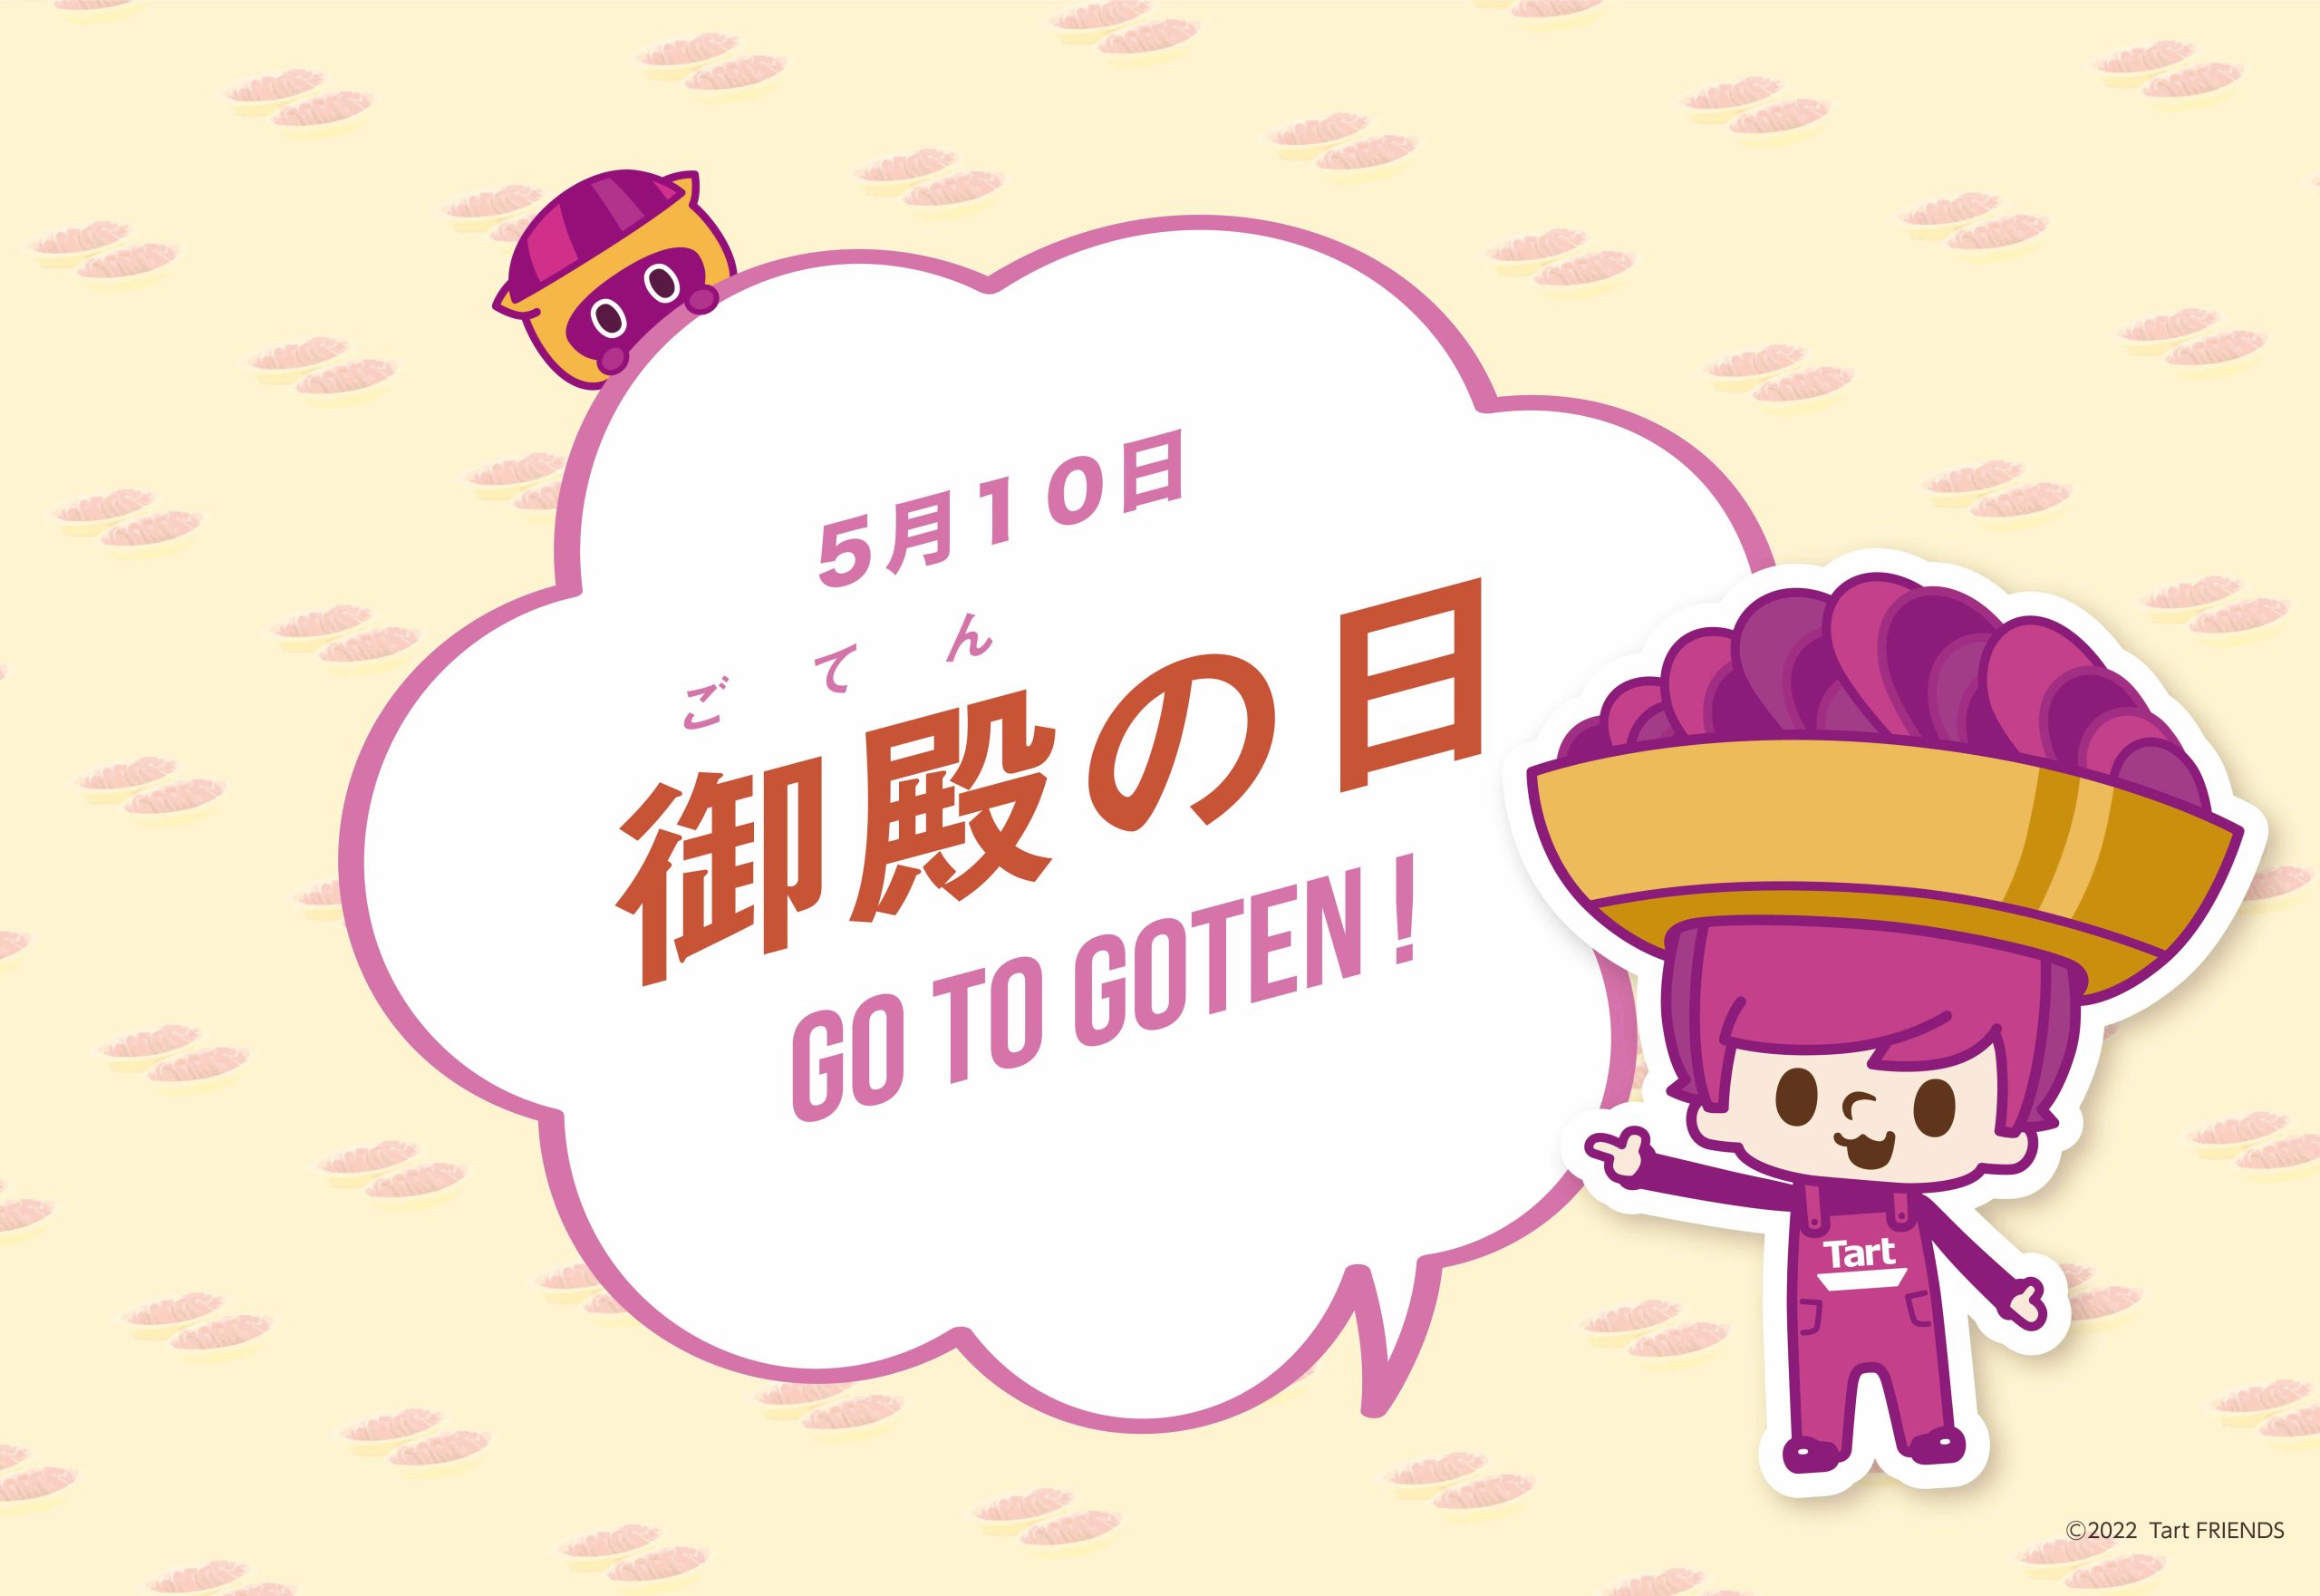 May 5th is “Goten Day” image